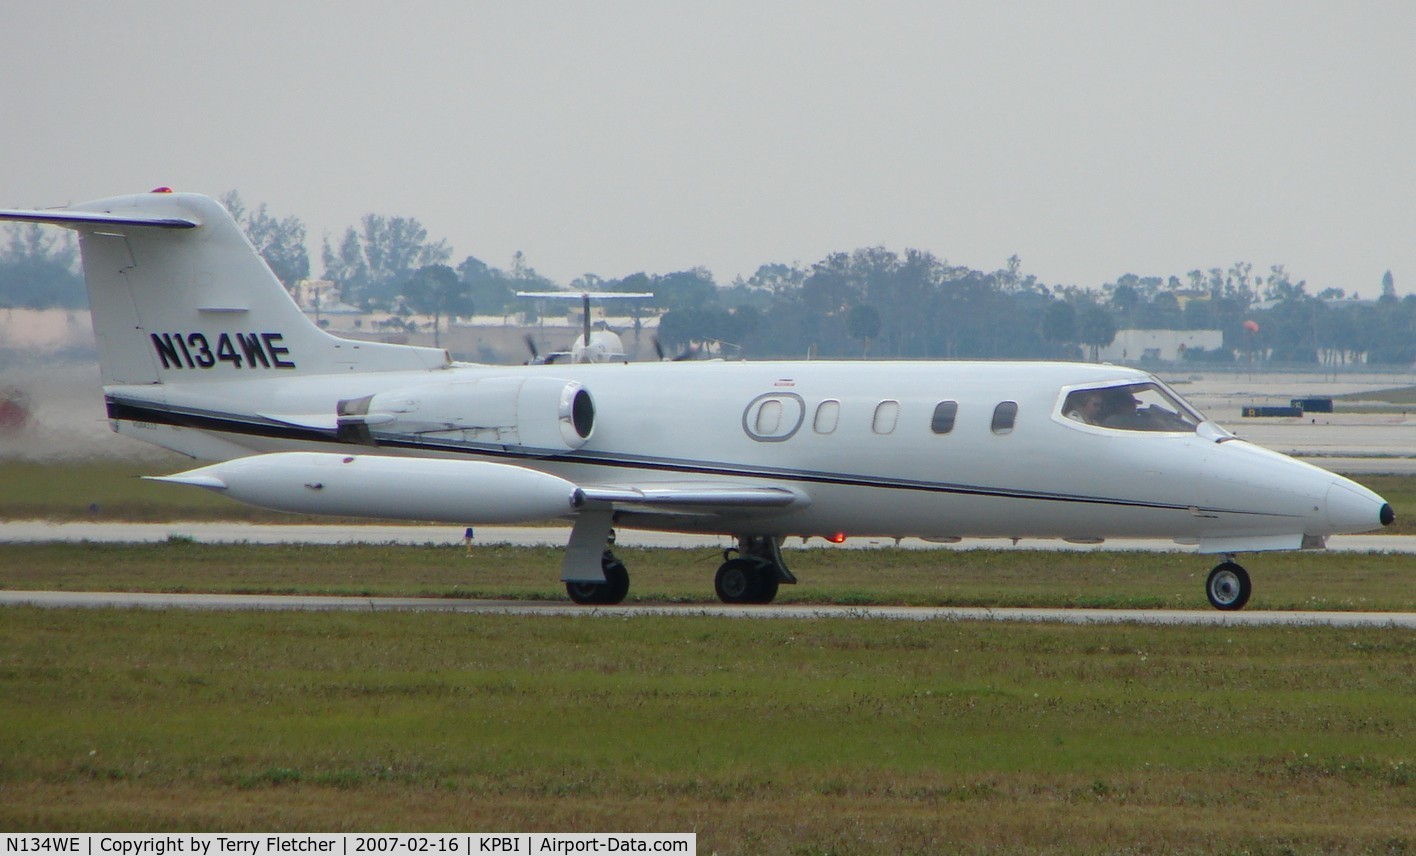 N134WE, 1977 Gates Learjet 25D C/N 222, part of the Friday afternoon arrivals 'rush' at PBI